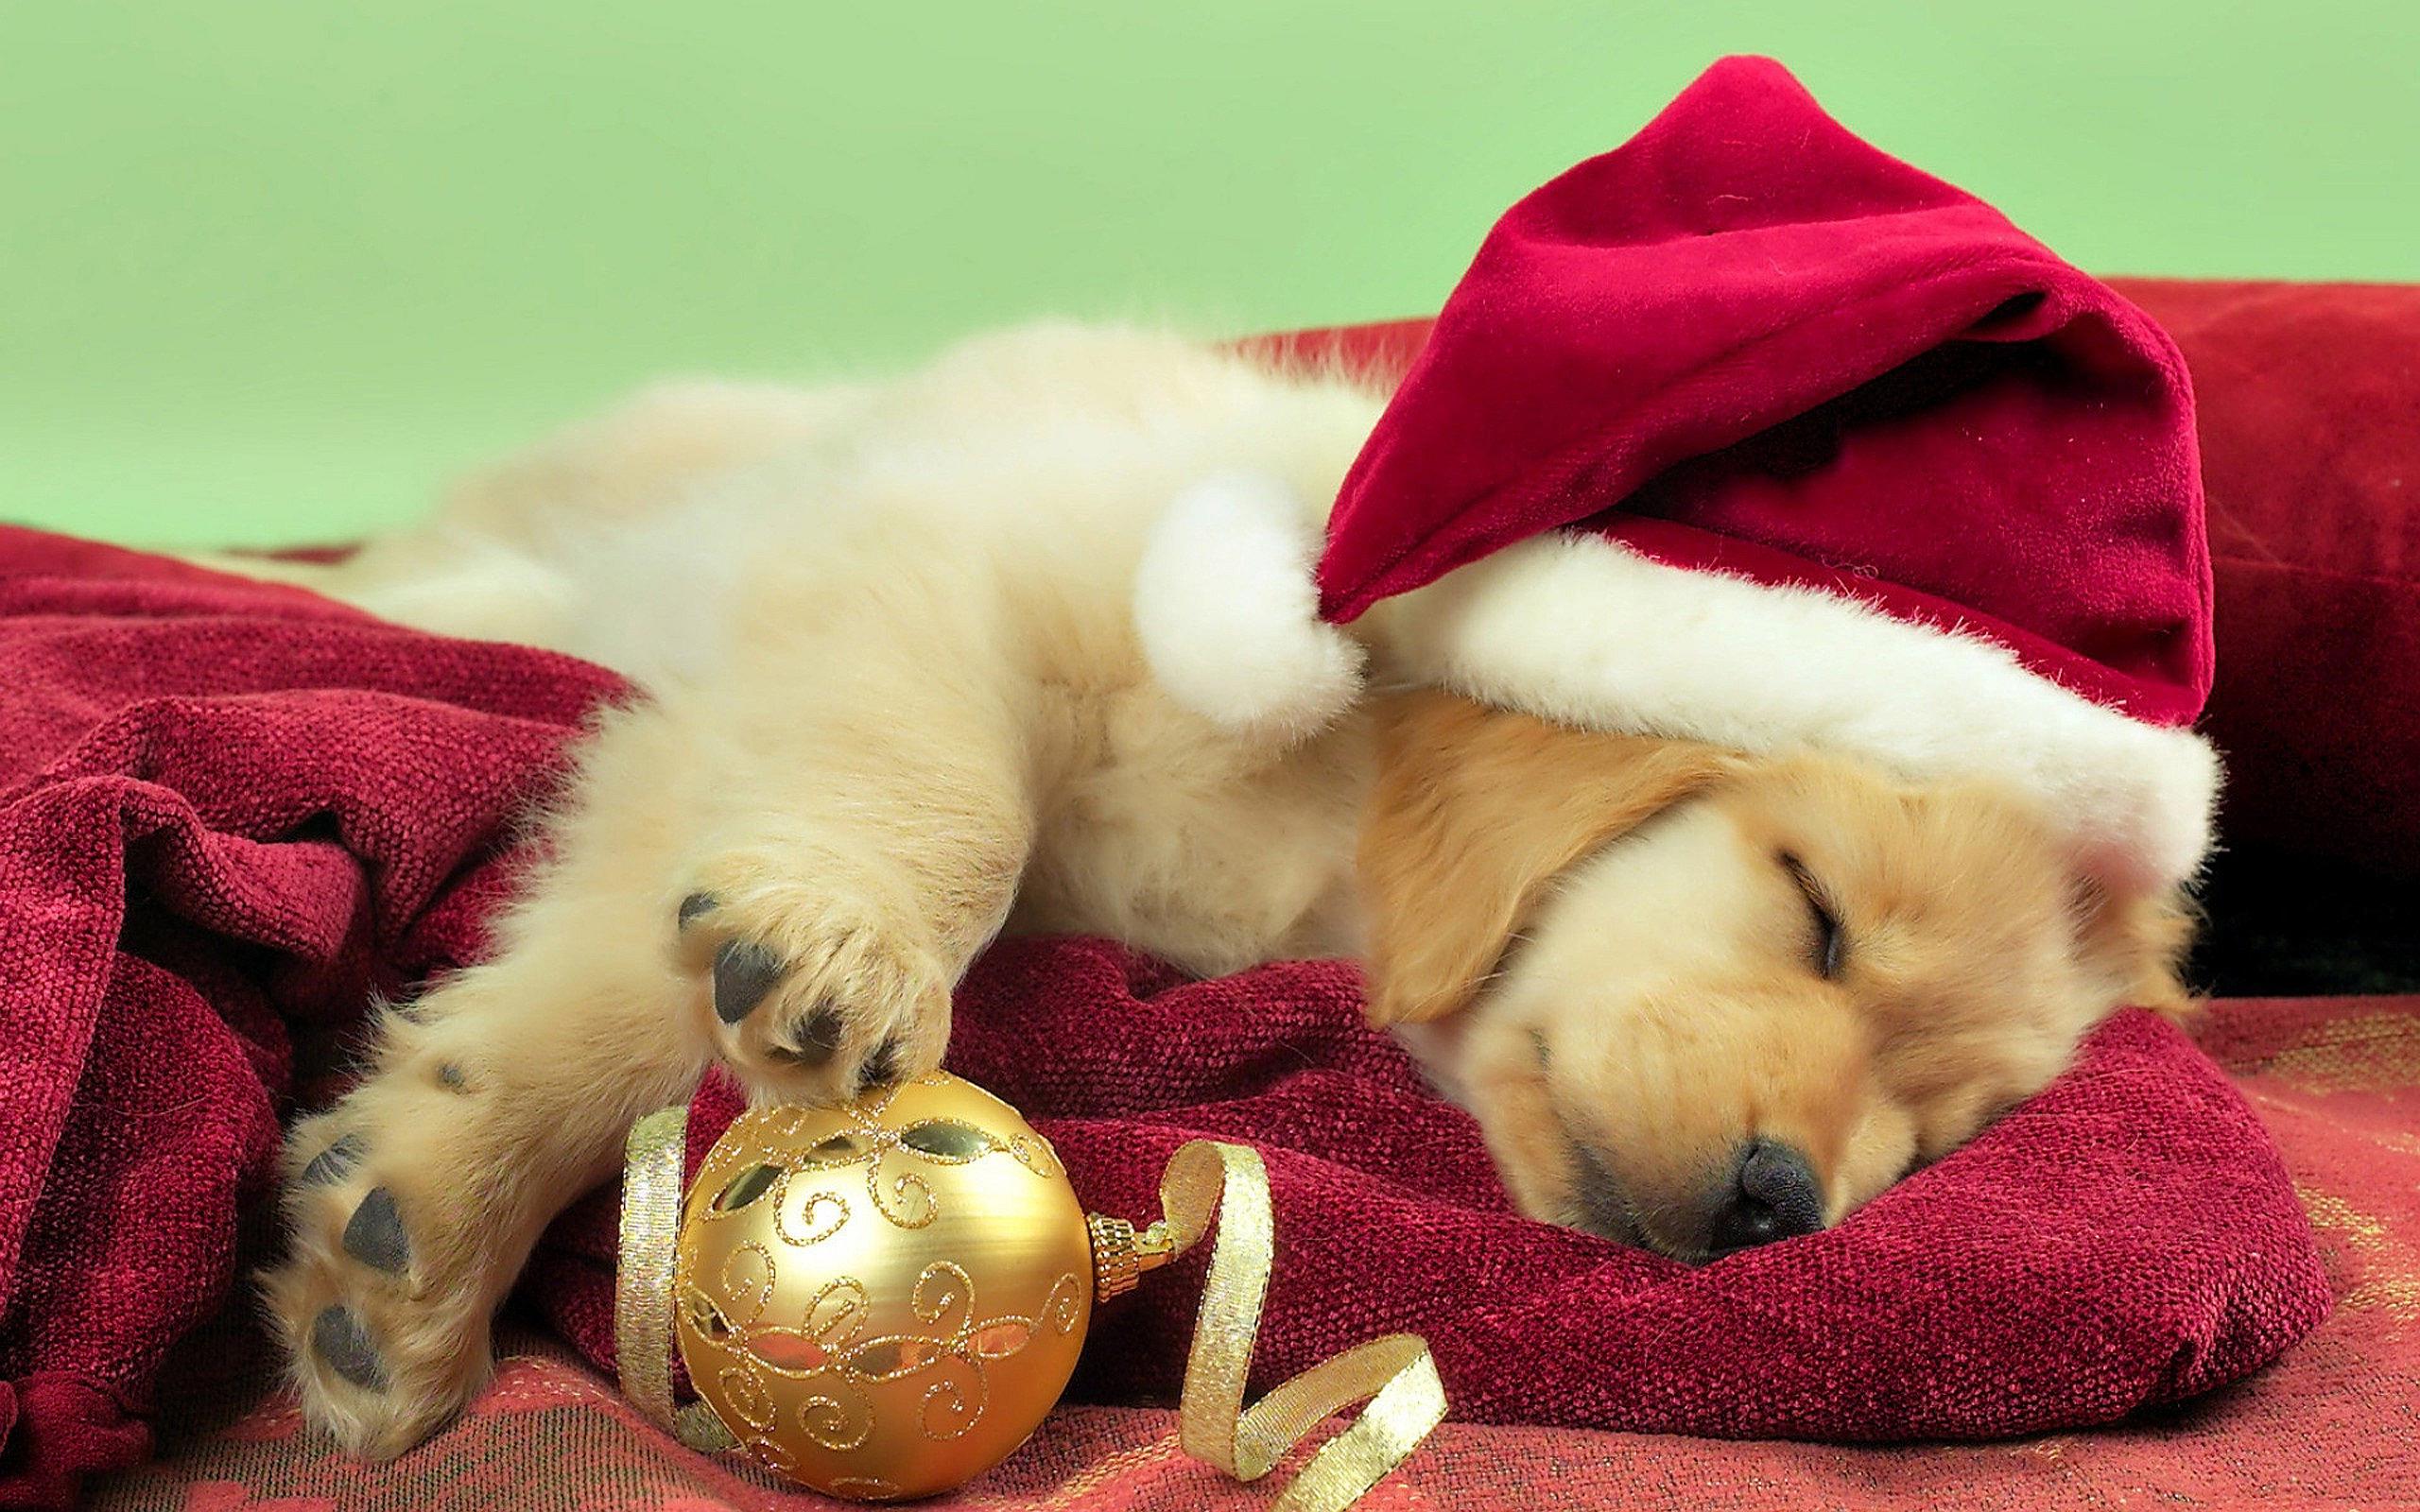 Is Christmas the Best Time for a New Dog?